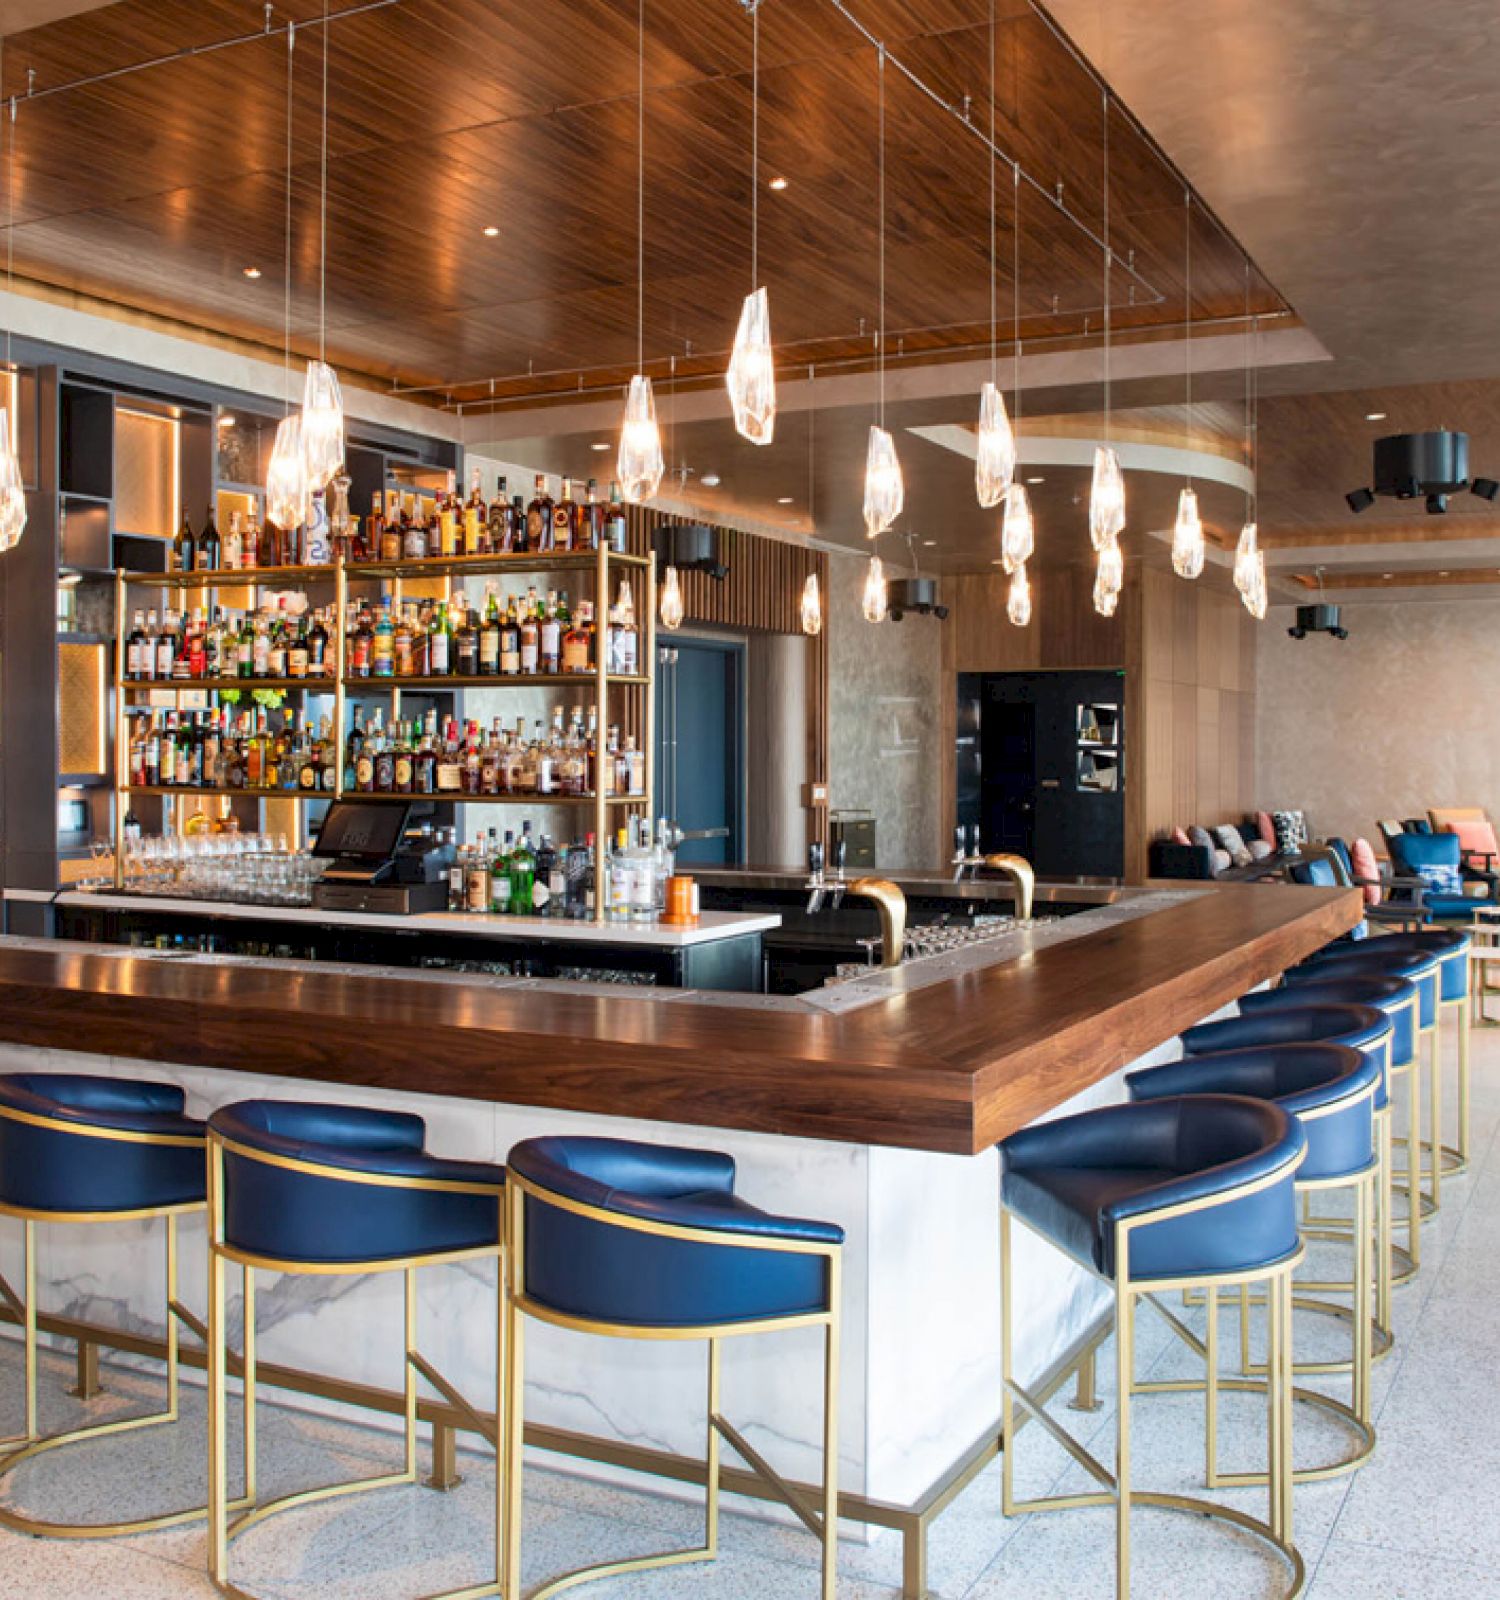 A modern bar with blue and gold stools, a fully stocked bar, hanging pendant lights, and a cozy seating area with couches in the background.